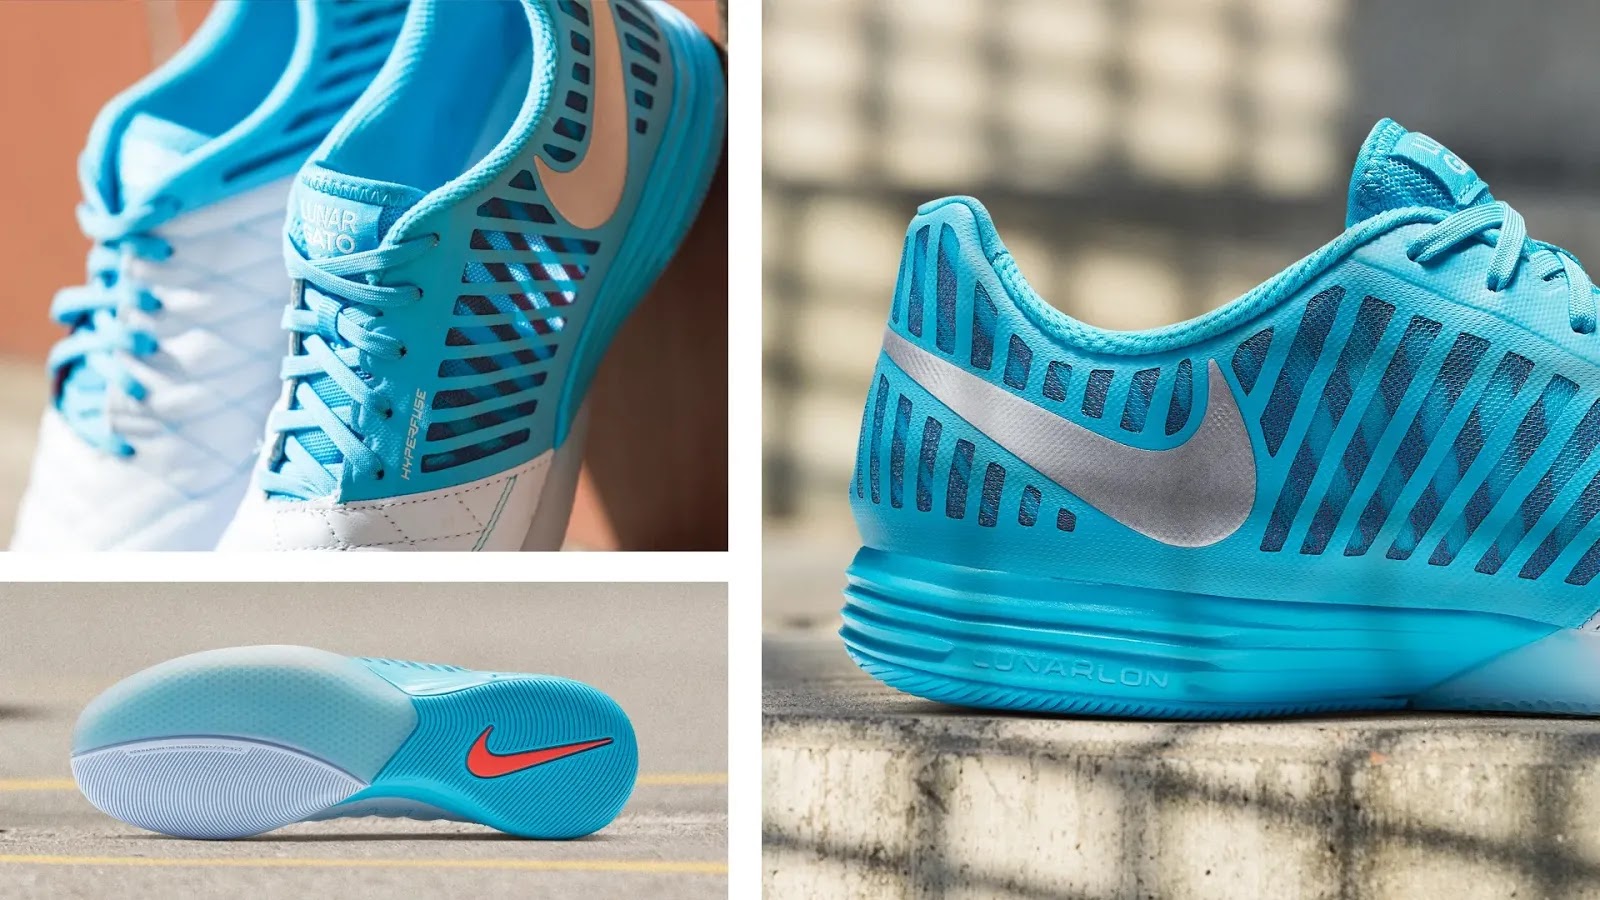 Satisfacer evolución maravilloso Comeback After Four Years: Turquoise Nike Lunar Gato 2019 Boots Released -  Footy Headlines